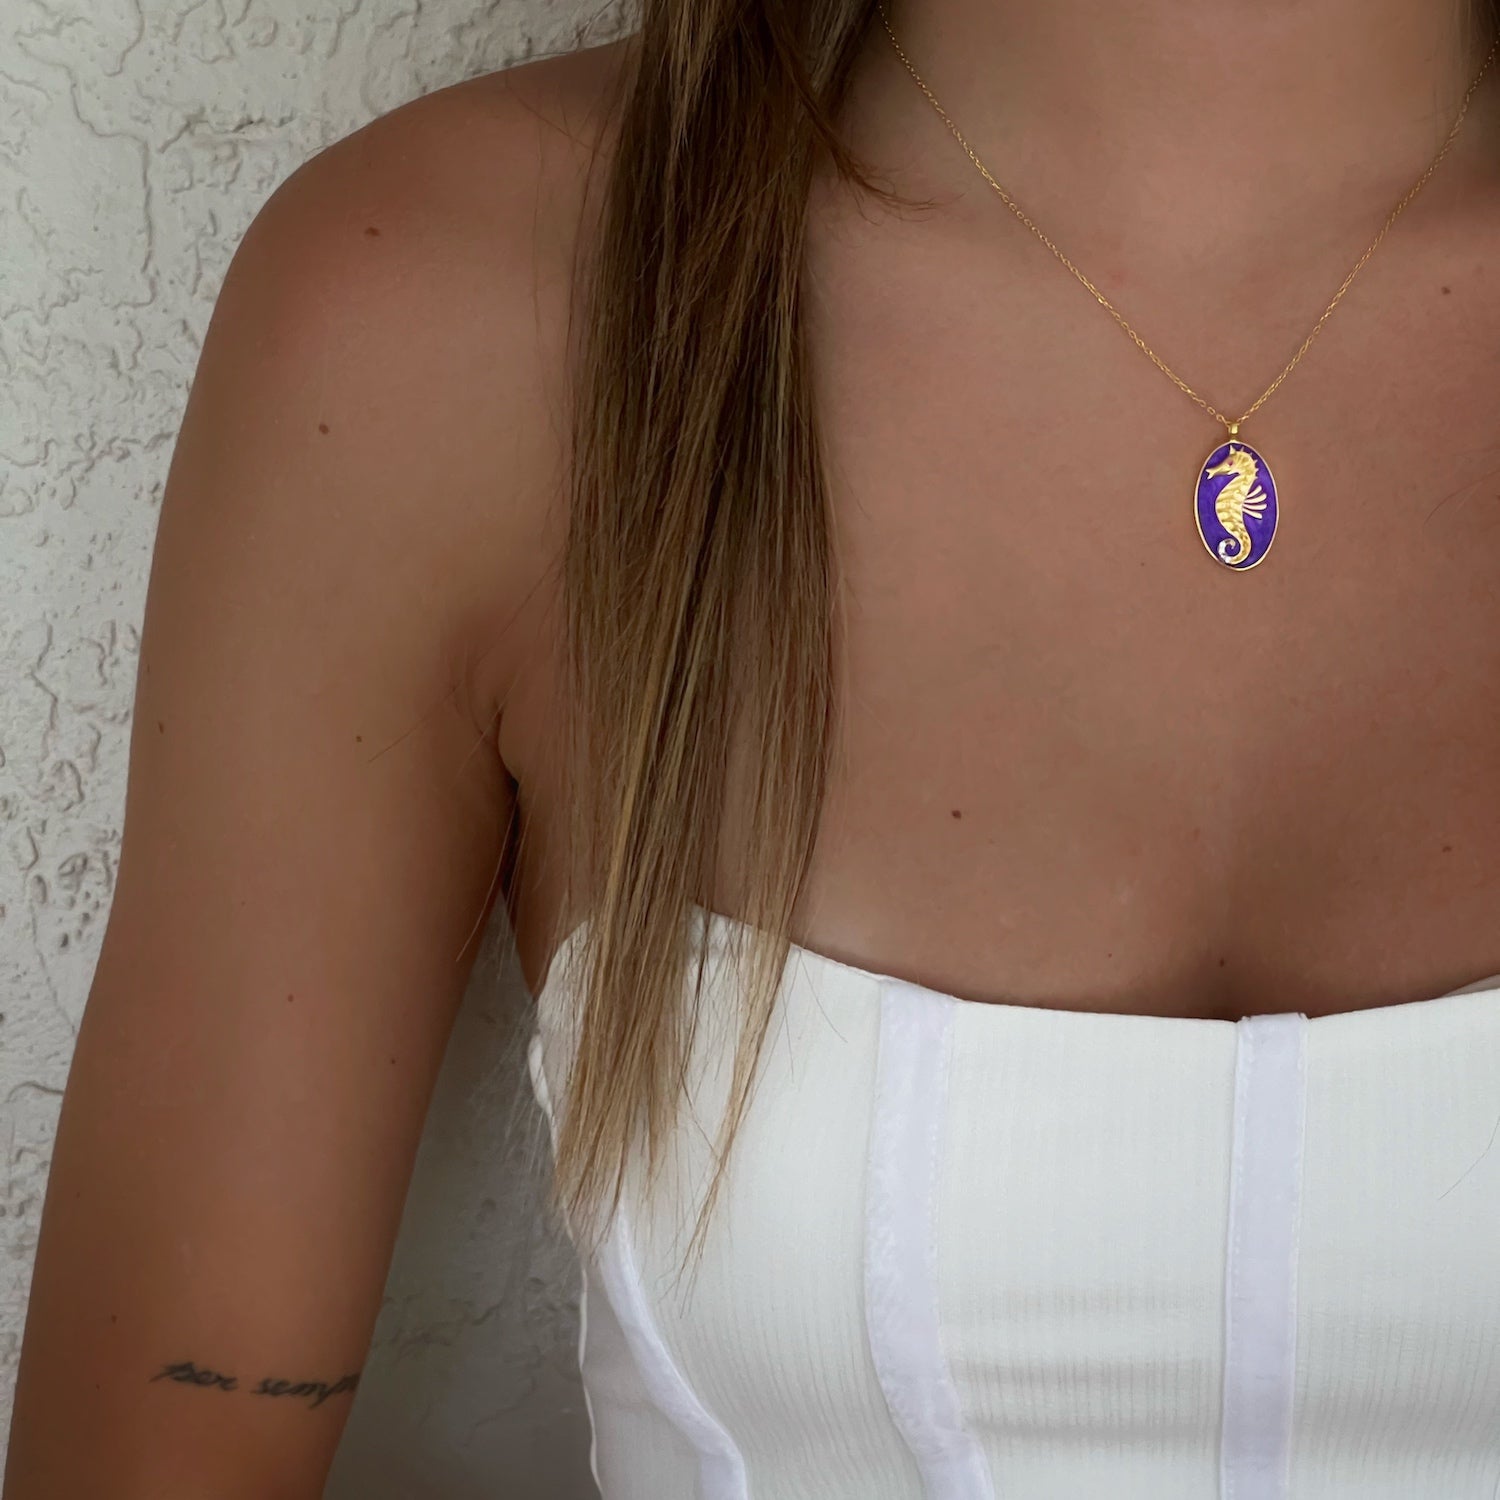 The Spirit Animal Blue Seahorse Necklace enhancing the neckline of a model, exuding a sense of protection and guidance.